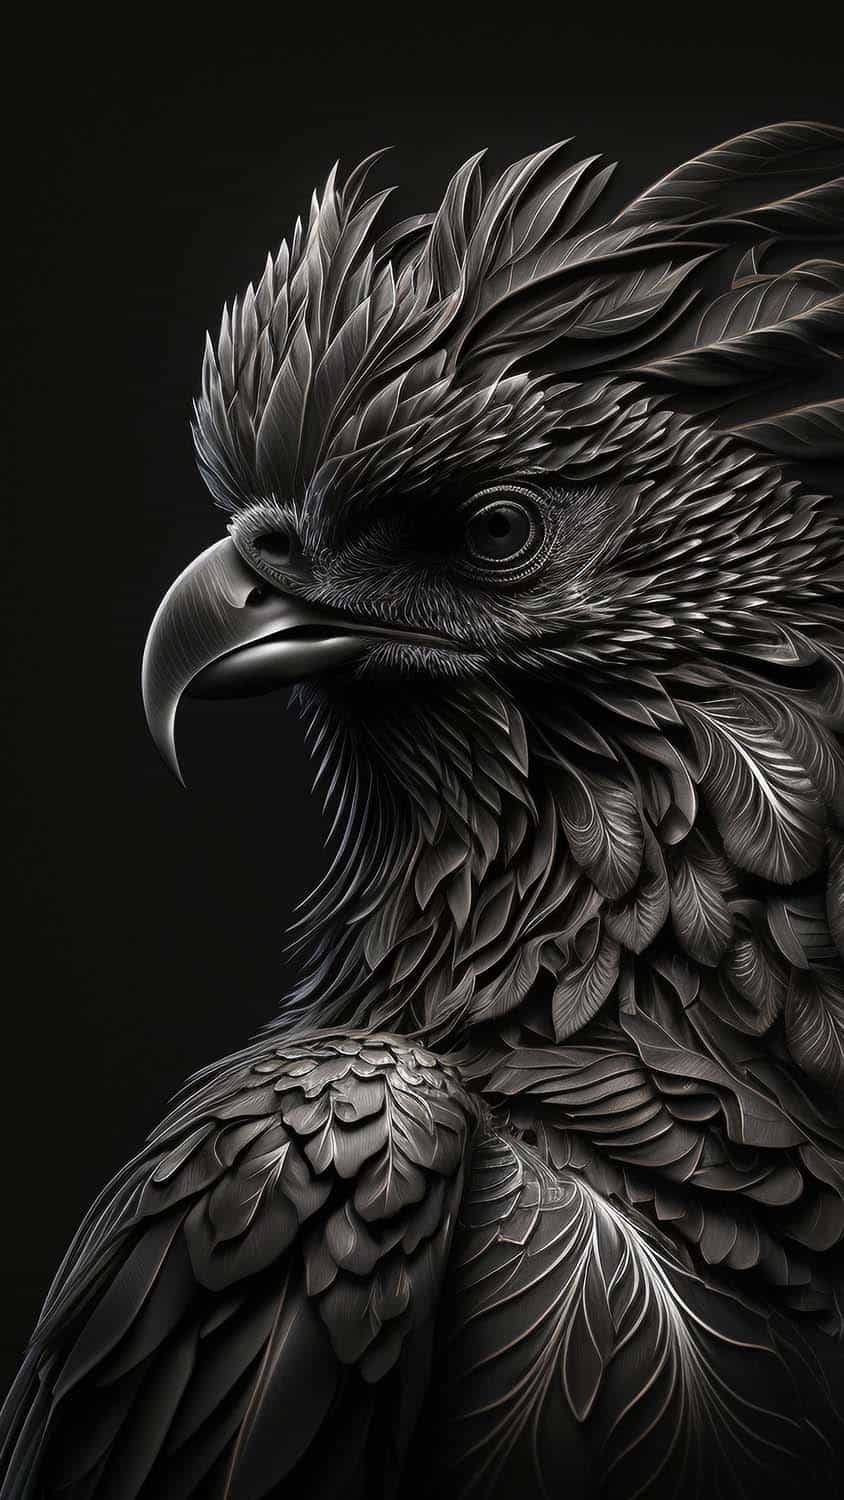 Black Eagle iPhone Wallpaper HD - iPhone Wallpapers